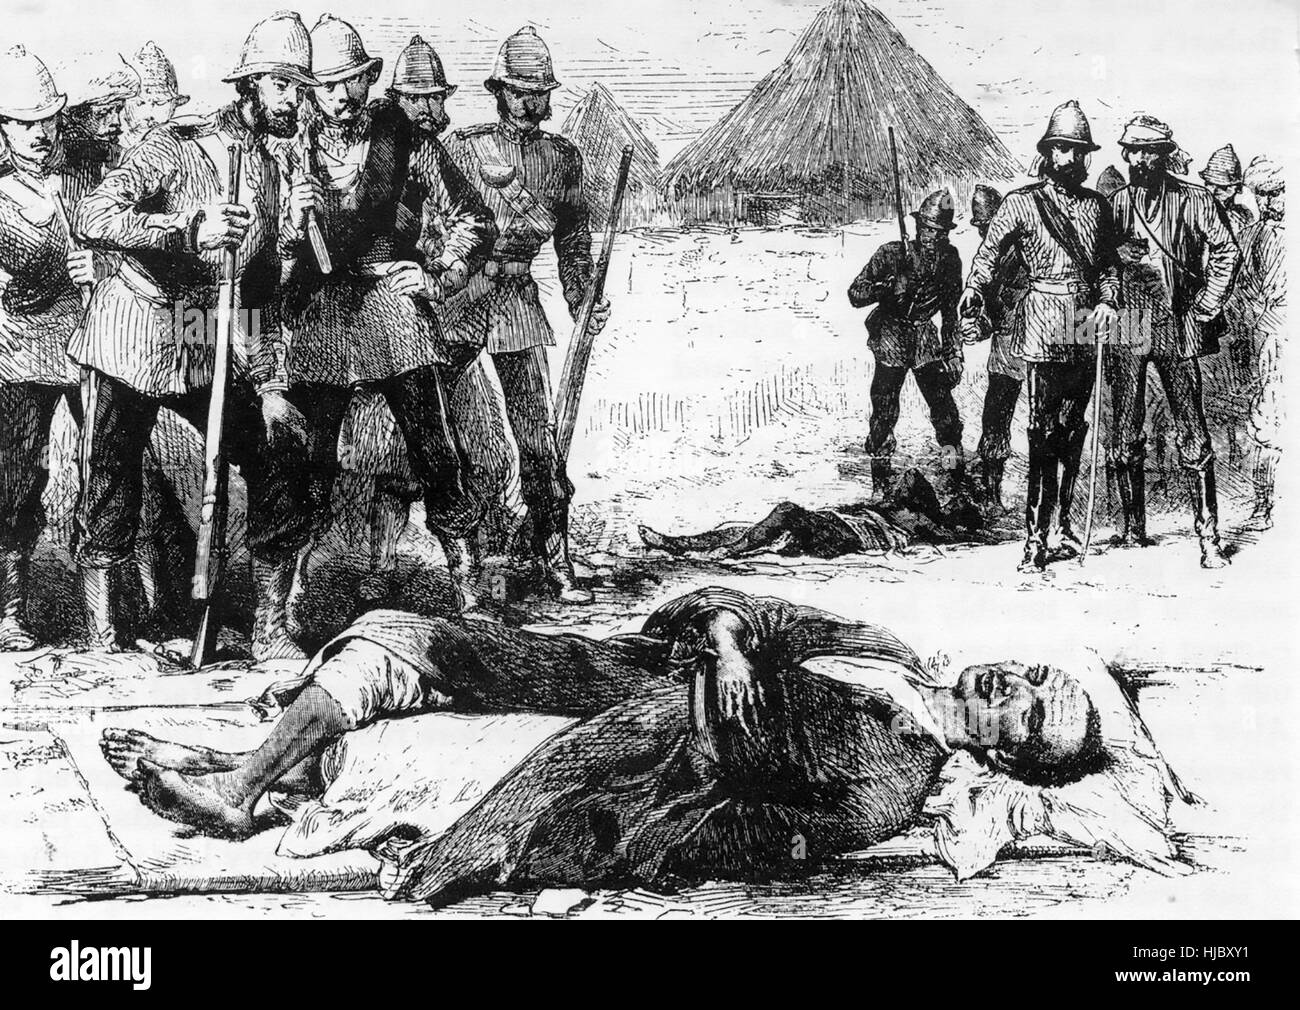 BATTLE OF MAGDALA, Abyssinia (now Ethiopia) April 1868. On April 13 after the battle British troops find the body of the Emperor Tewodros II who had committed suicide Stock Photo